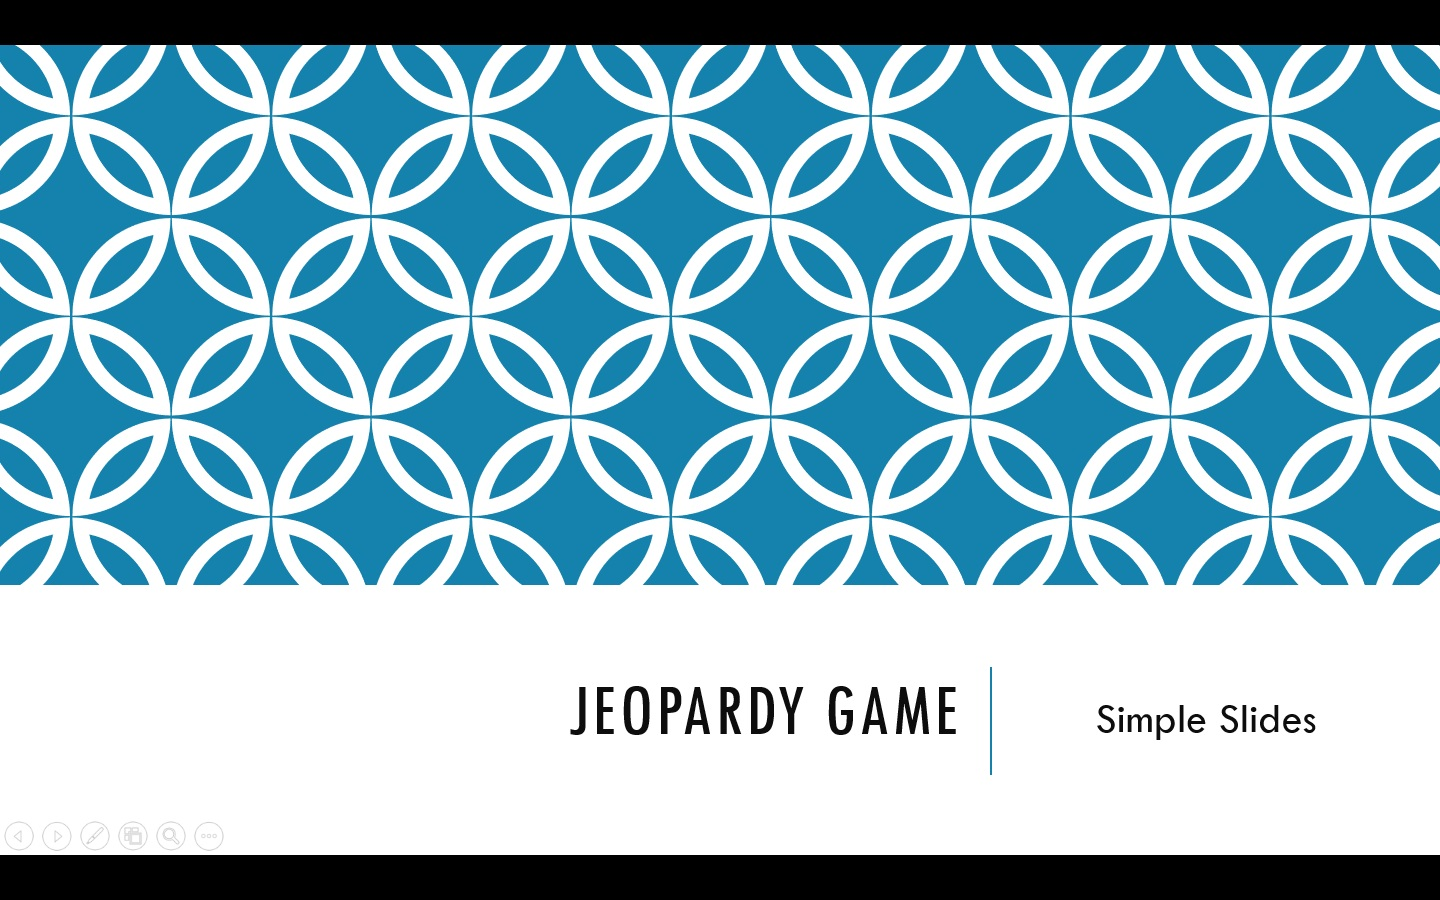 Try running your Jeopardy game in PowerPoint